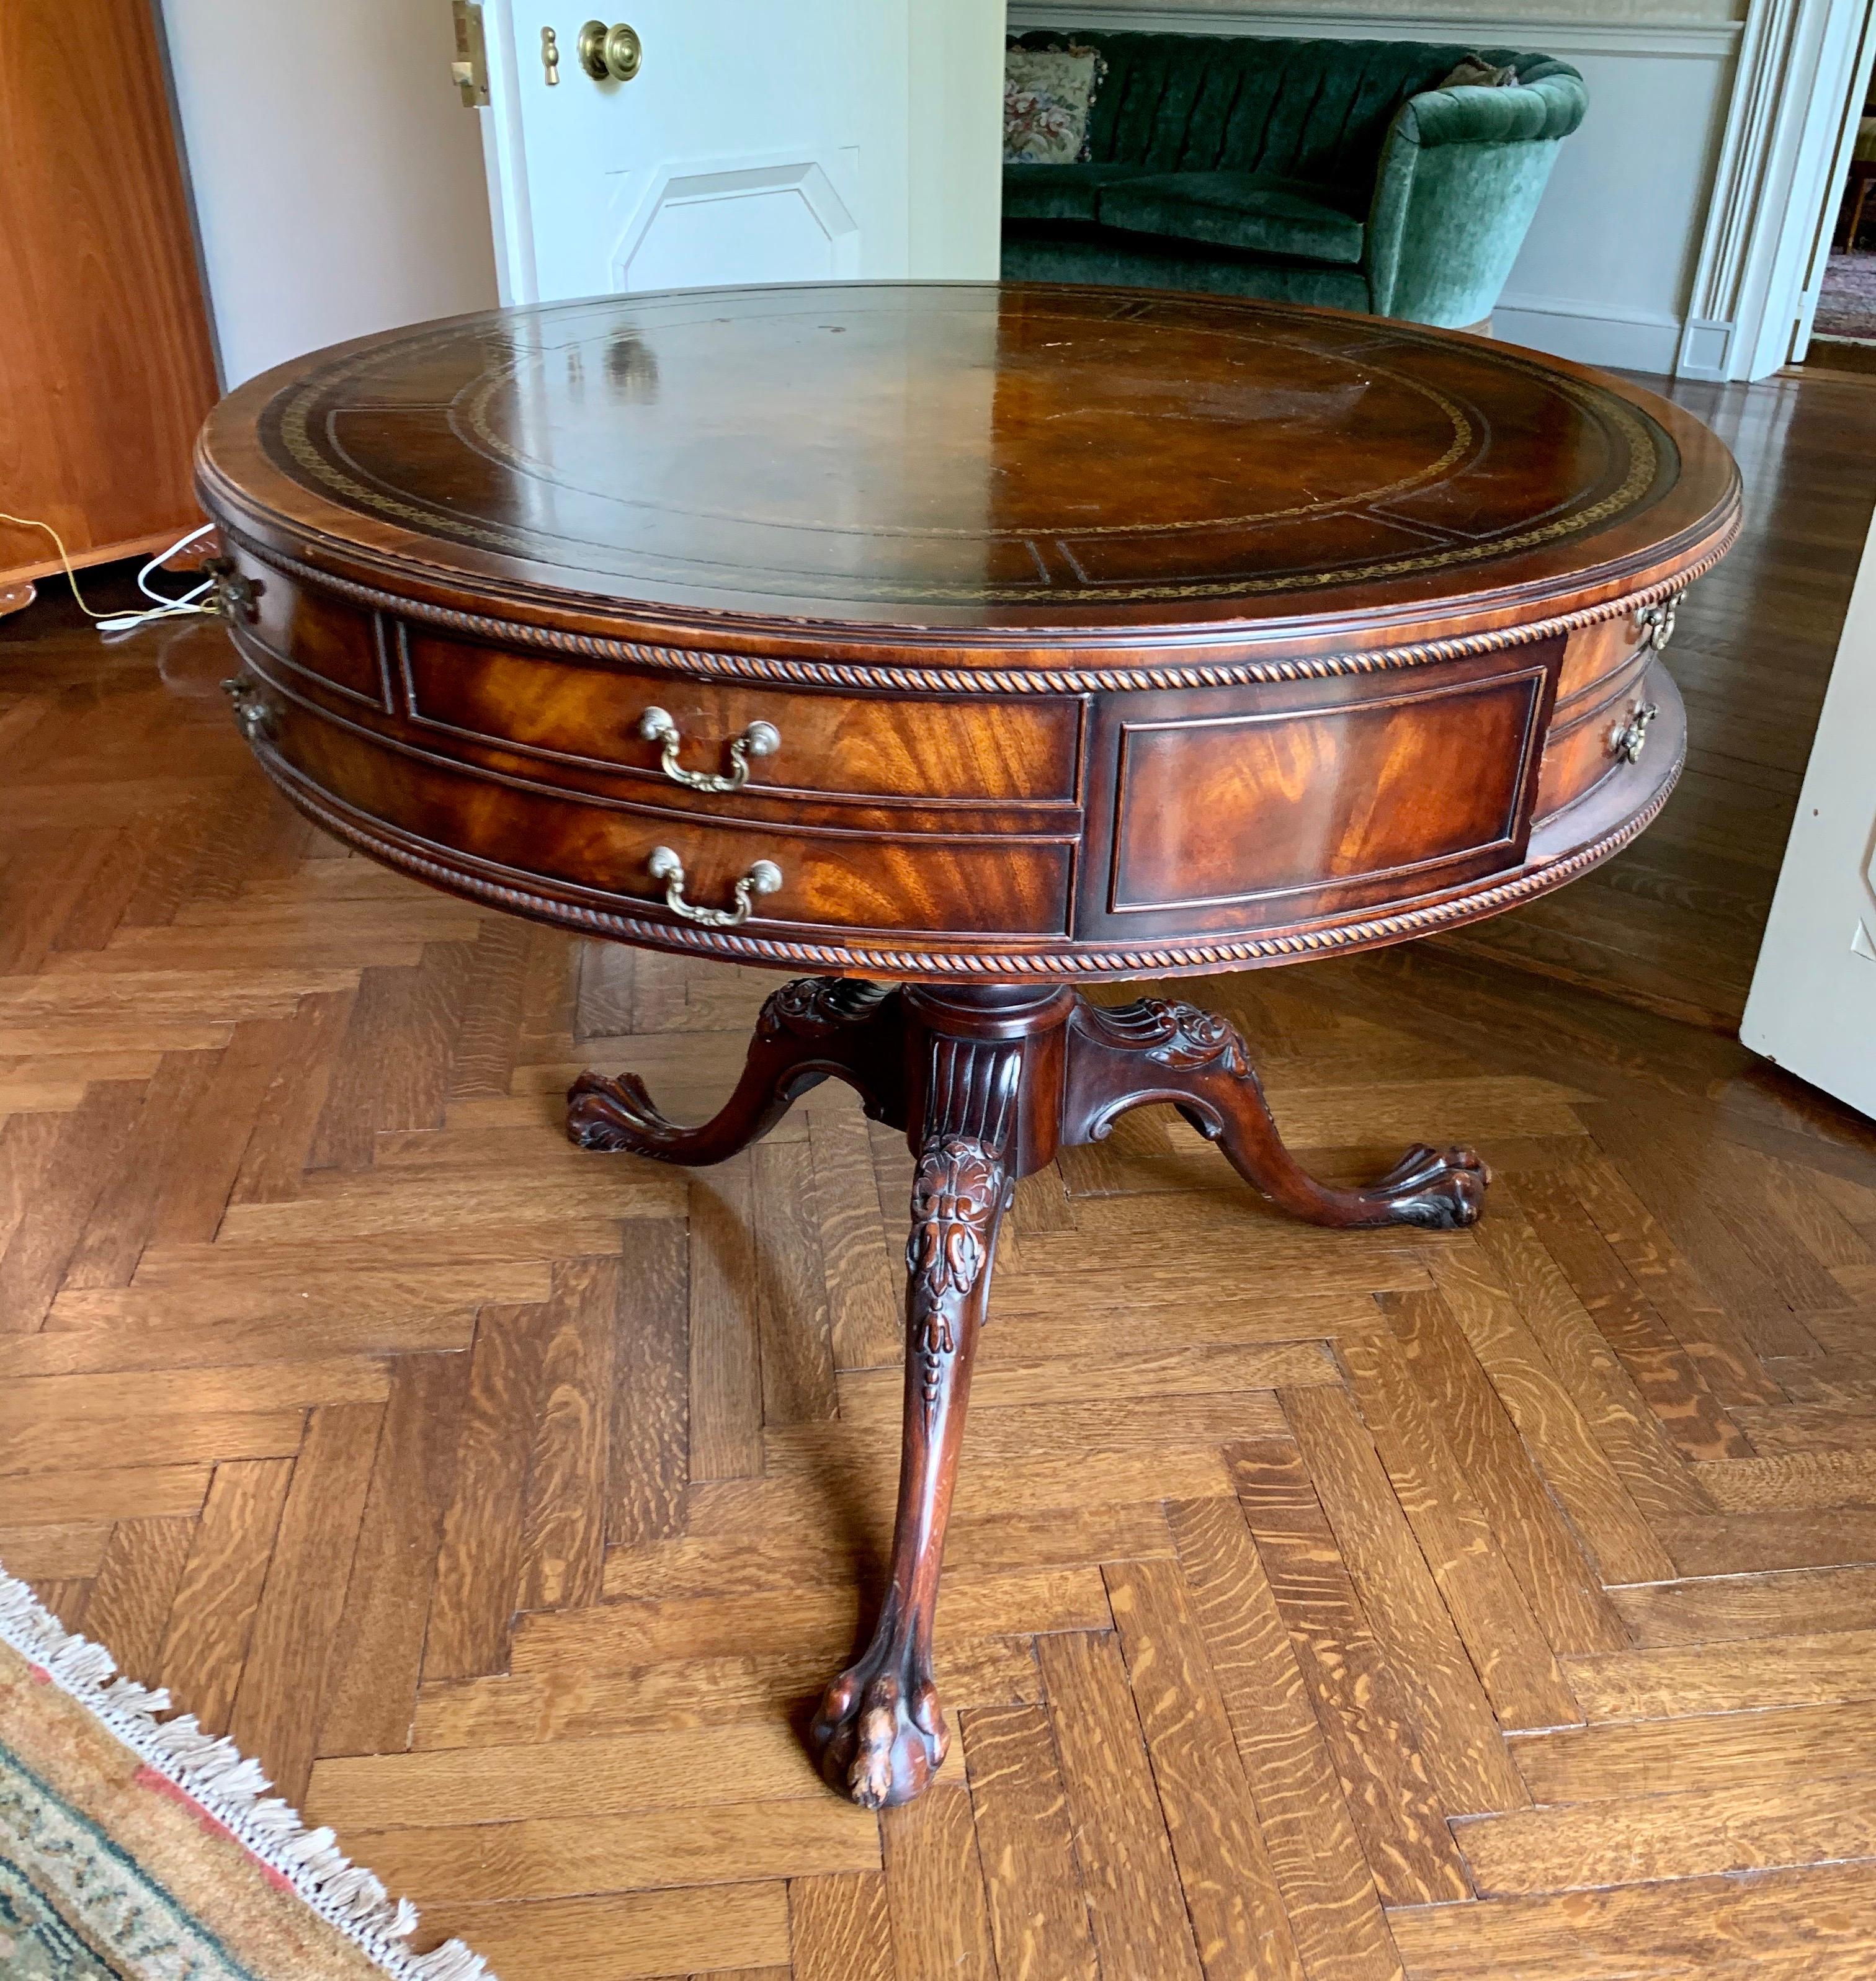 English drum table with gorgeous mahogany throughout and a leather top, circa 1920s
Features one real drawer and the balance, faux drawers. Great lines and better scale.
The ball and claw feet and formidable and really set this piece apart. Very